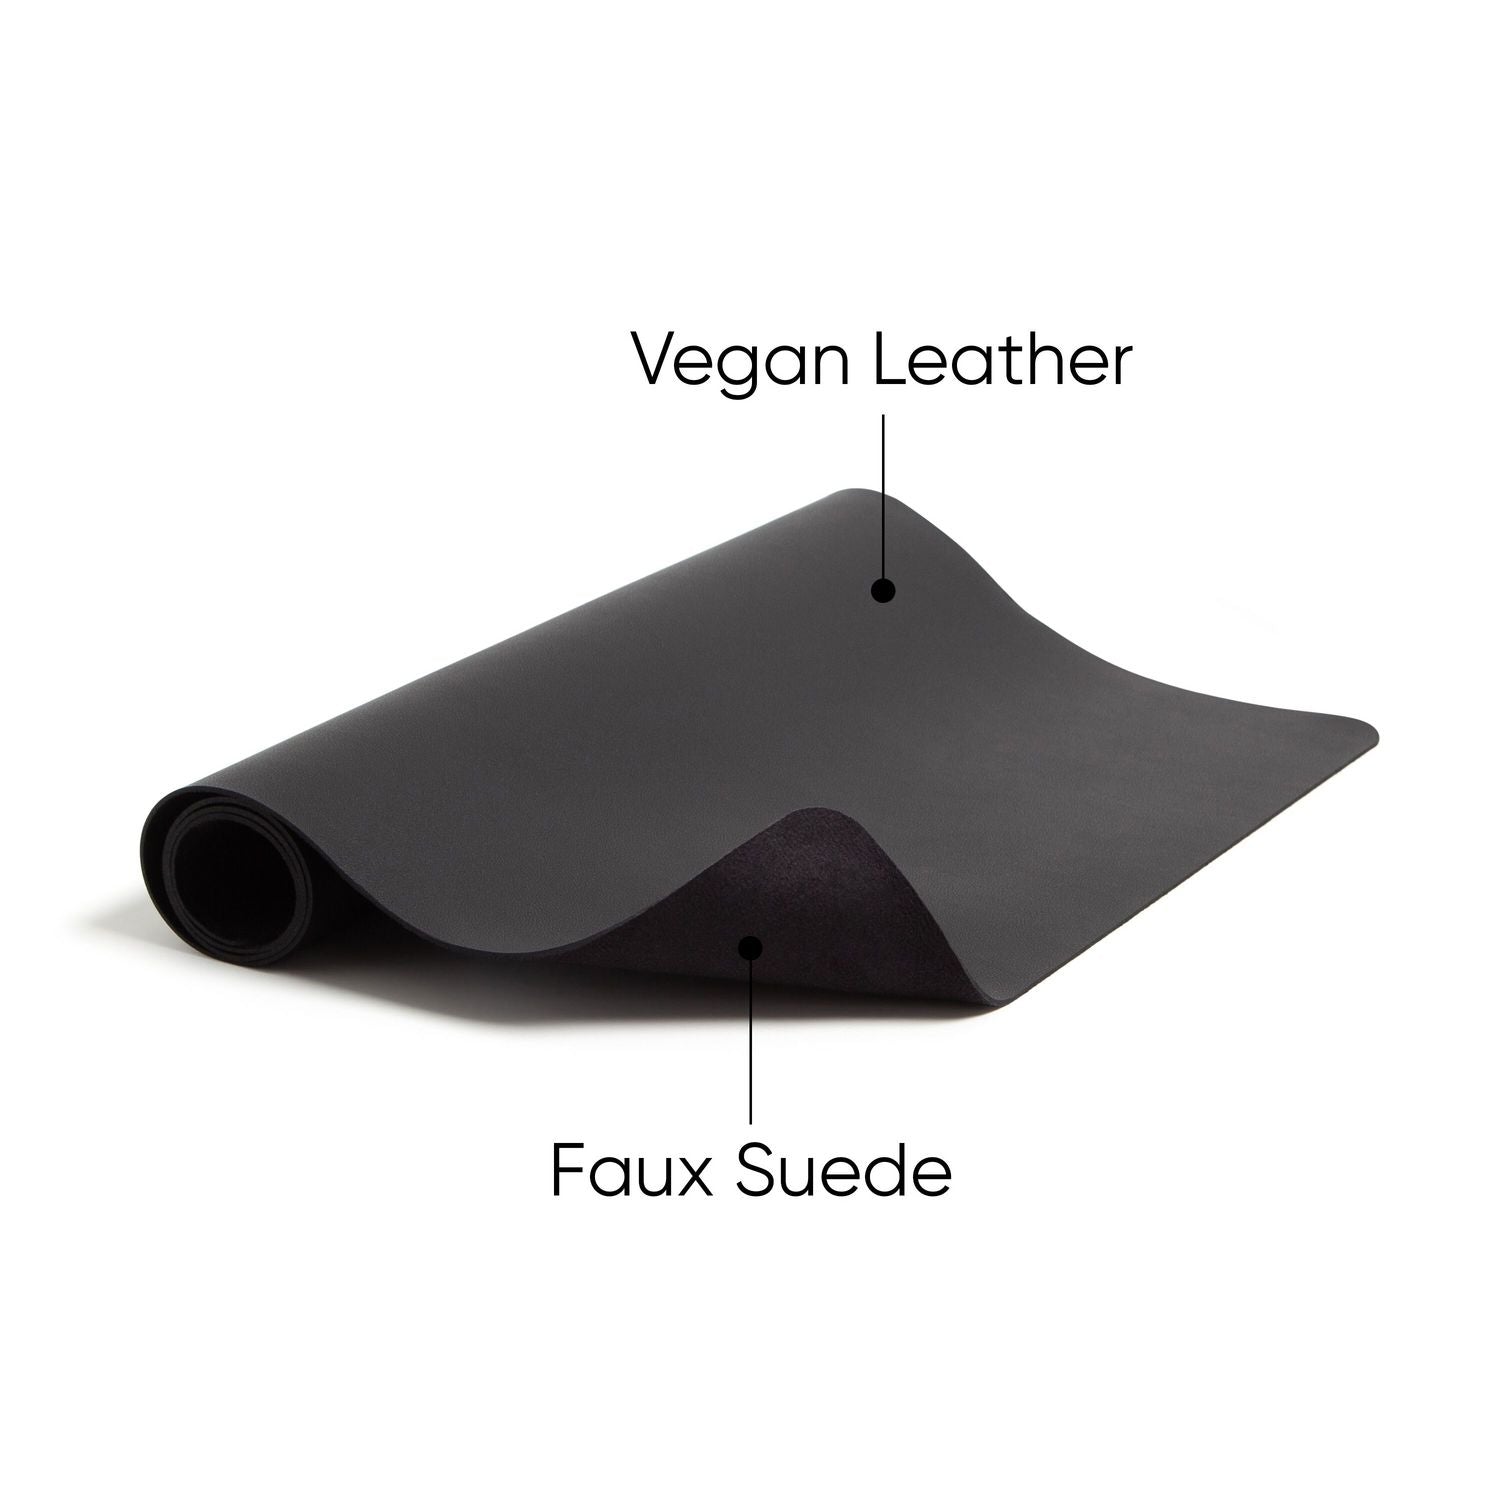 vegan-leather-desk-pads-36-x-17-charcoal_smd64828 - 2